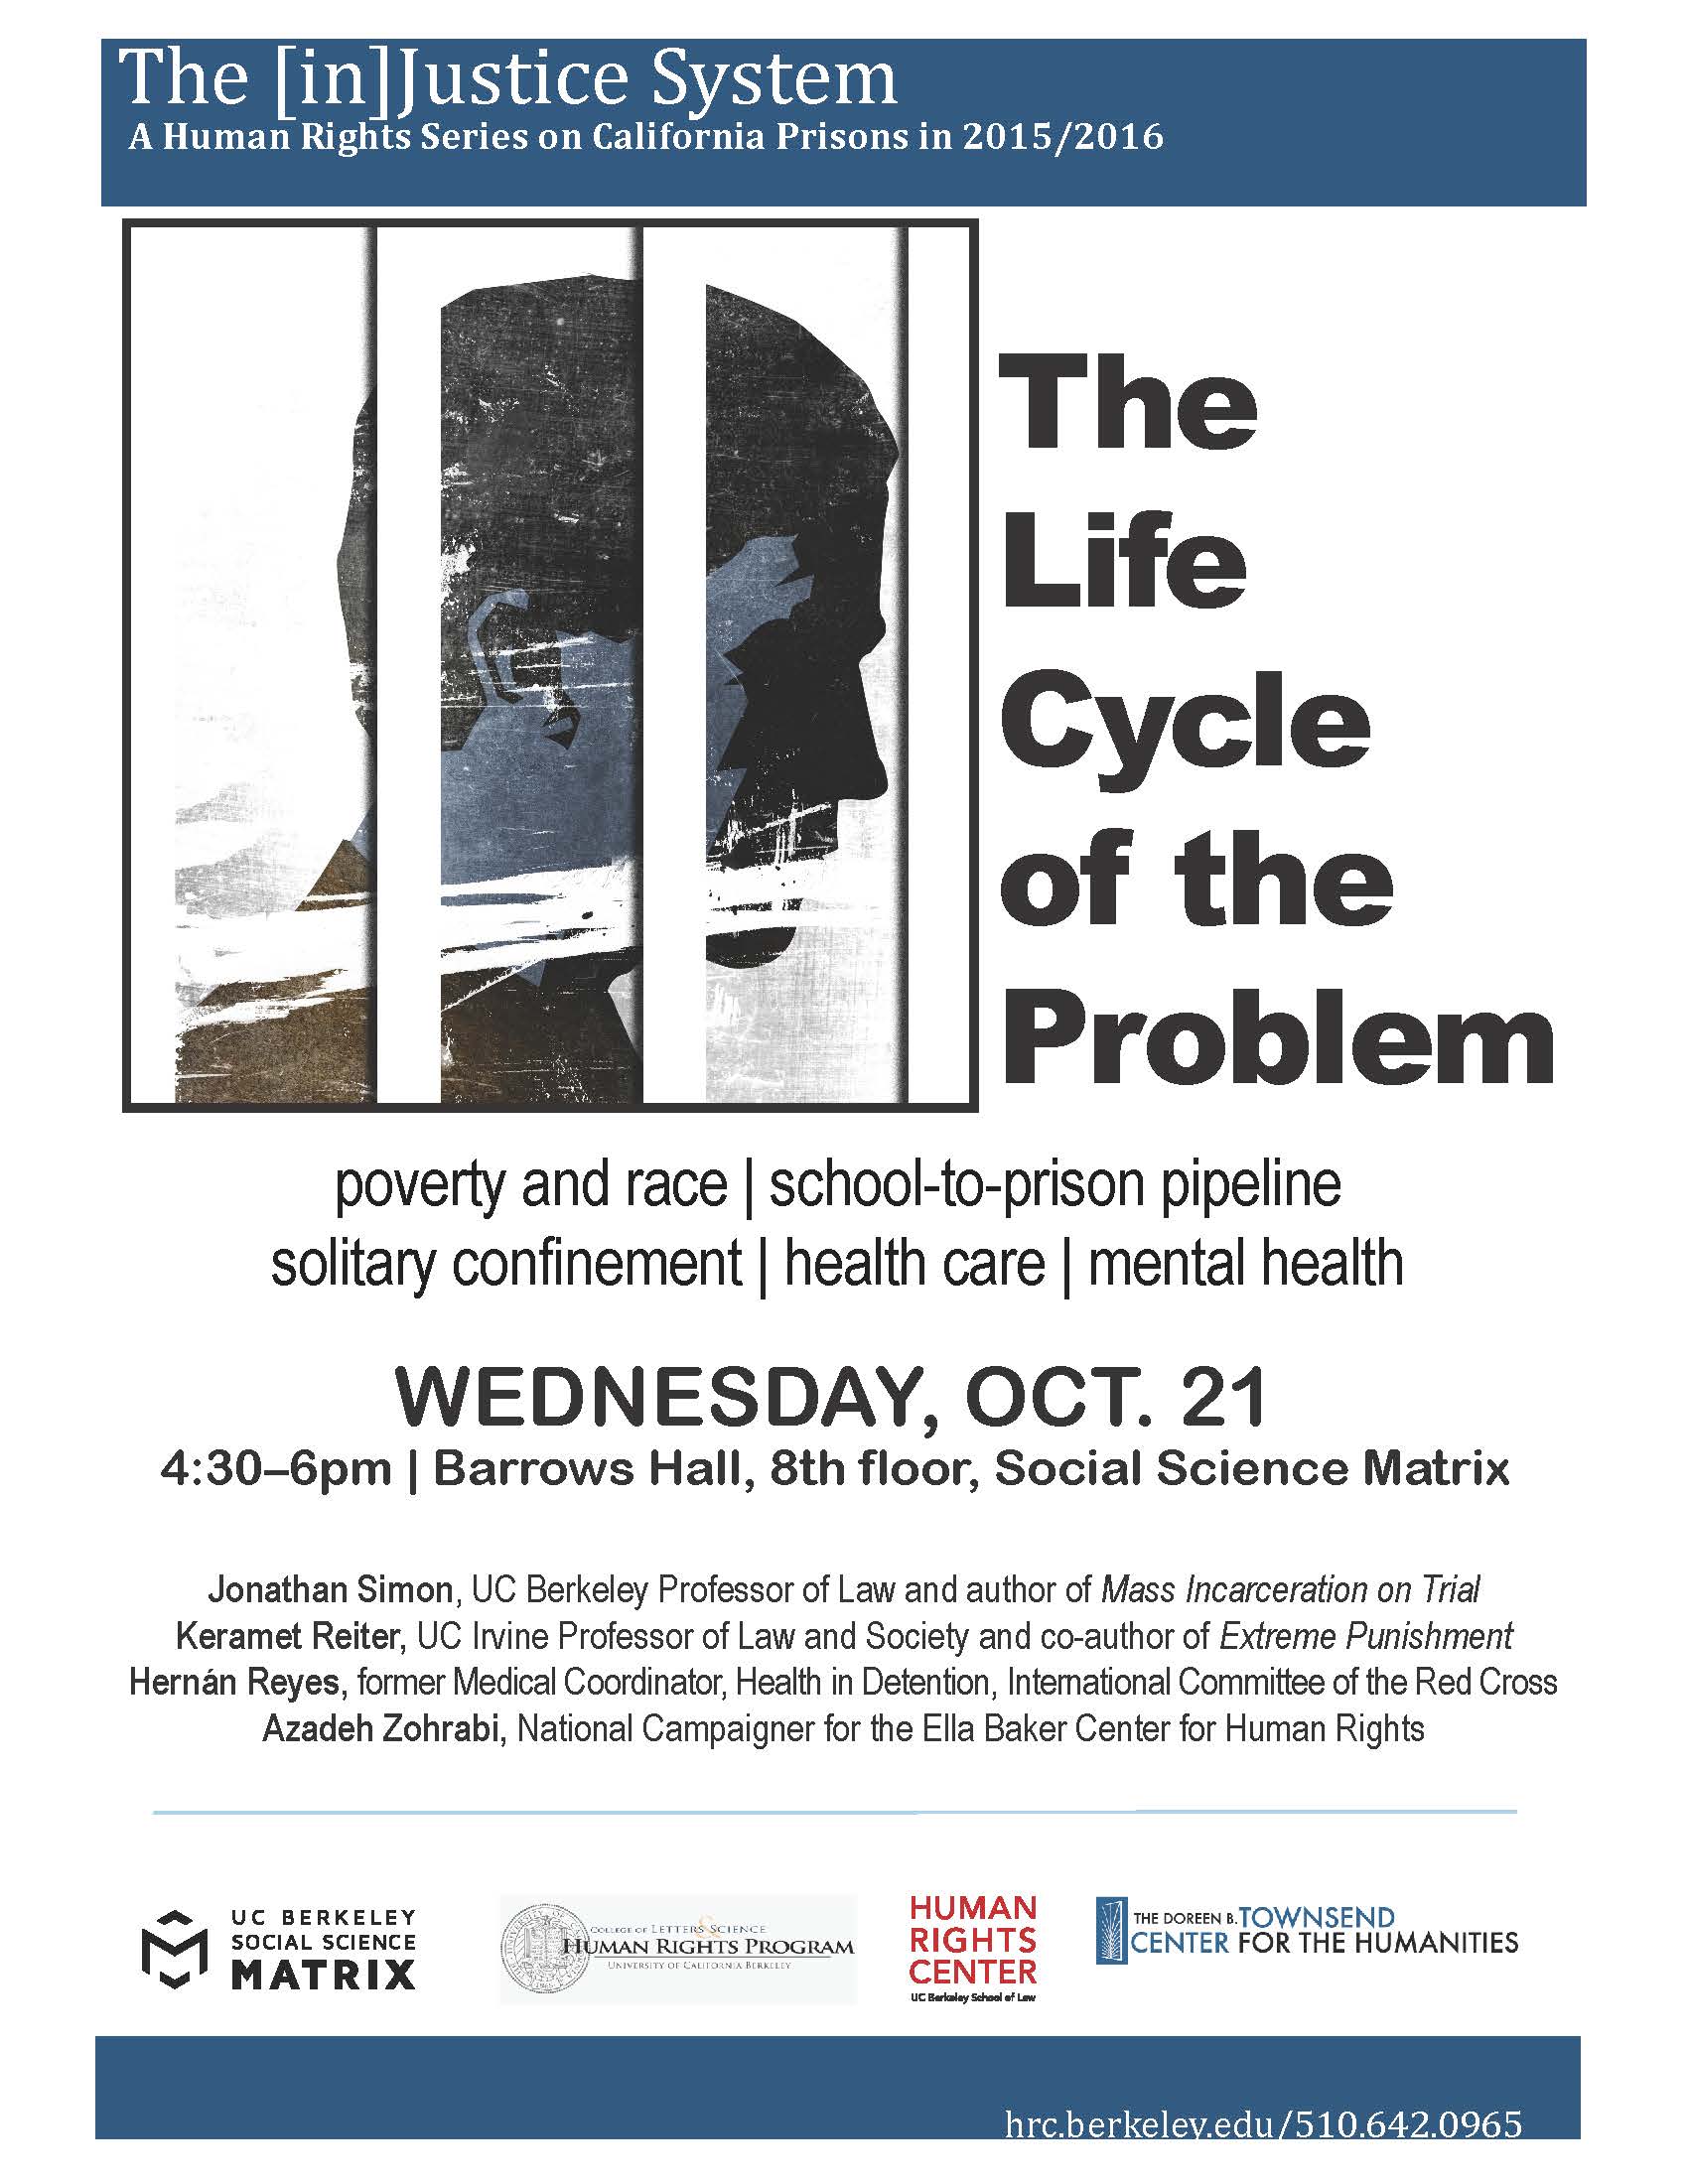 The flyer for Life Cycle of the Problem